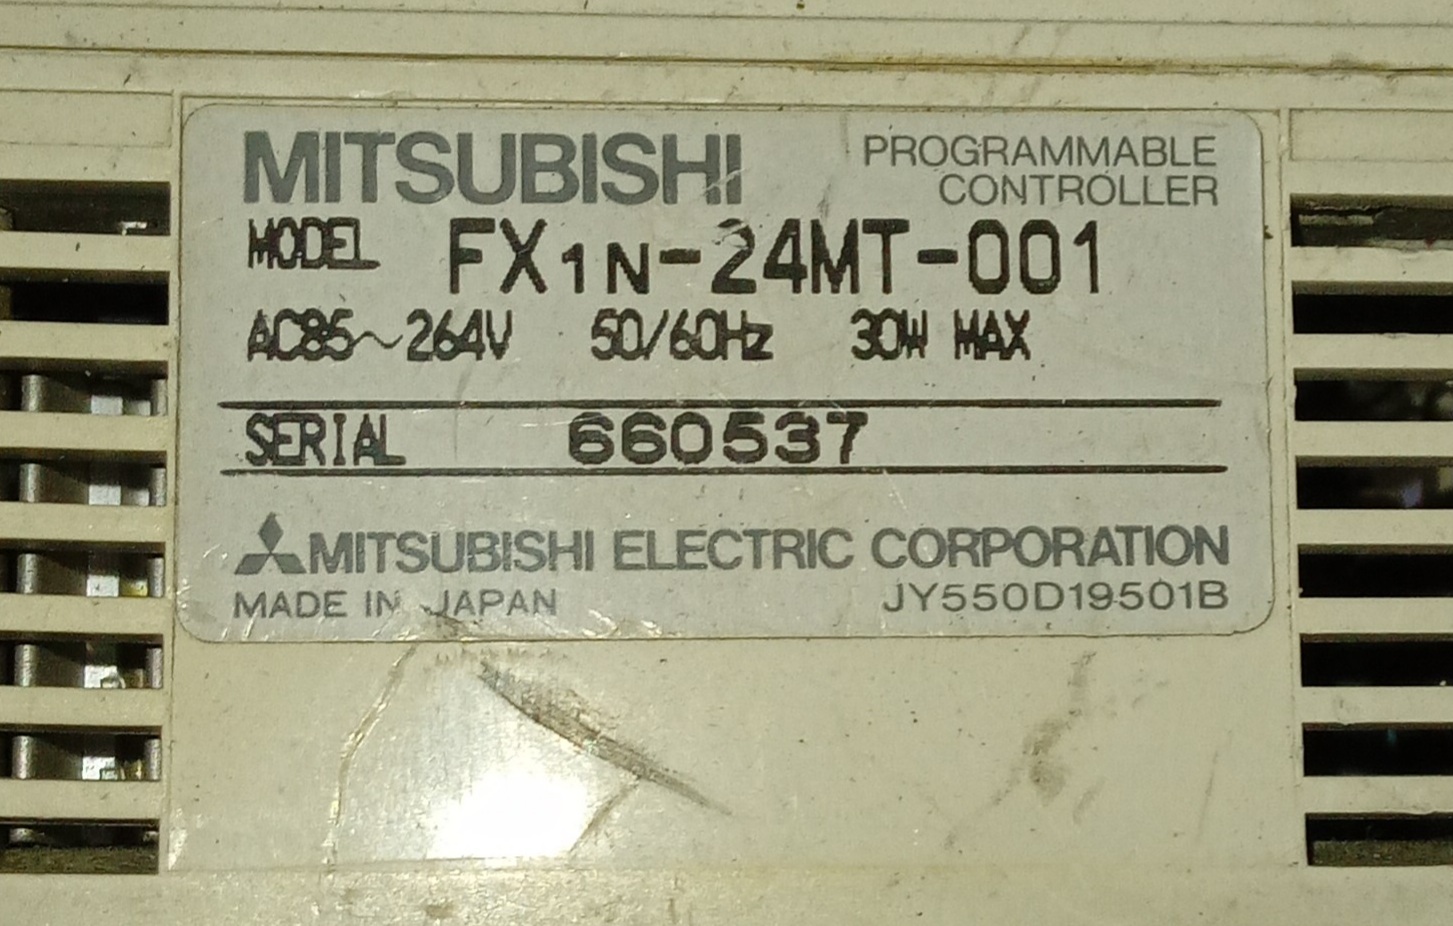 MITSUBISHI PROGRAMMABLE CONTROLLER FX1N-24MT-001